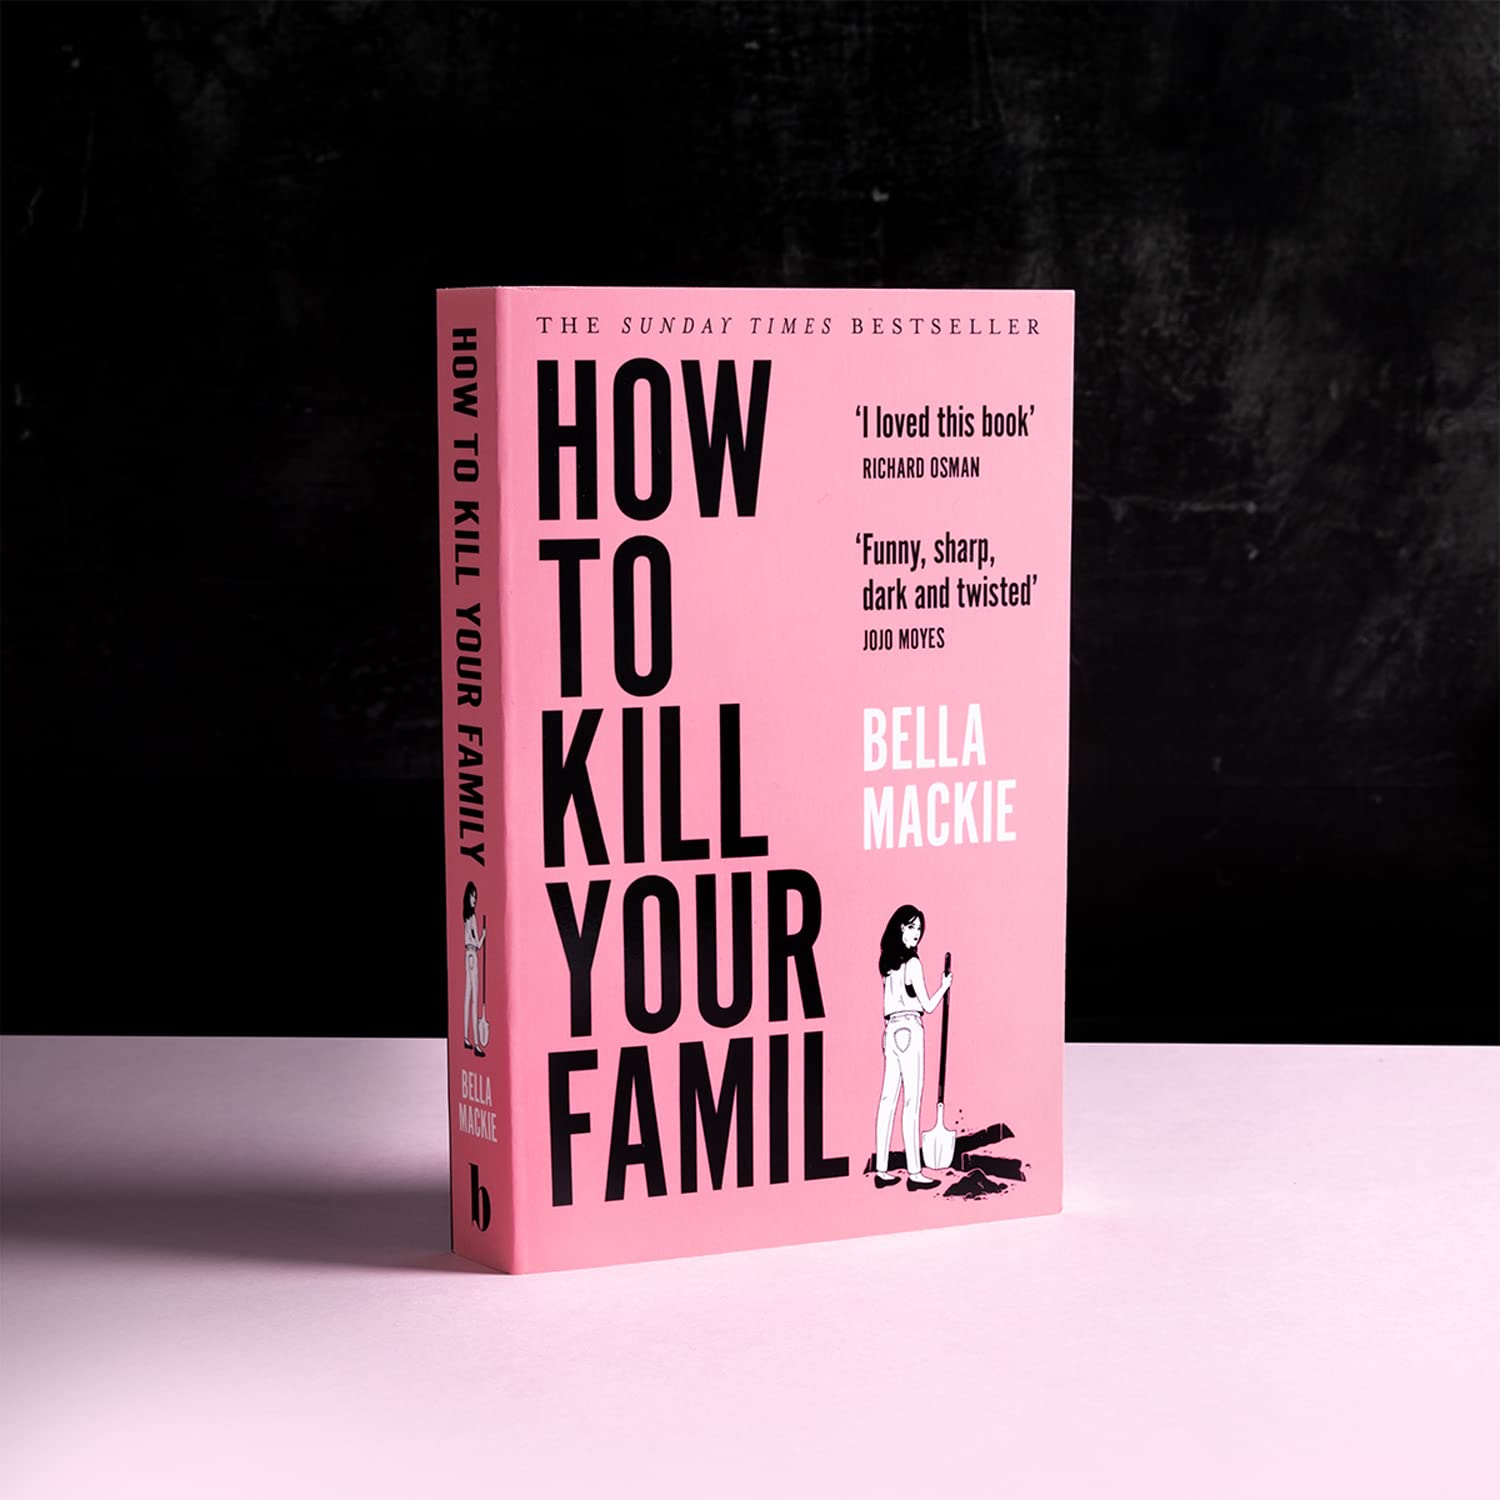 HOW TO KILL YOUR FAMILY, BELLA MACKIE, HARPERCOLLINS PUB.